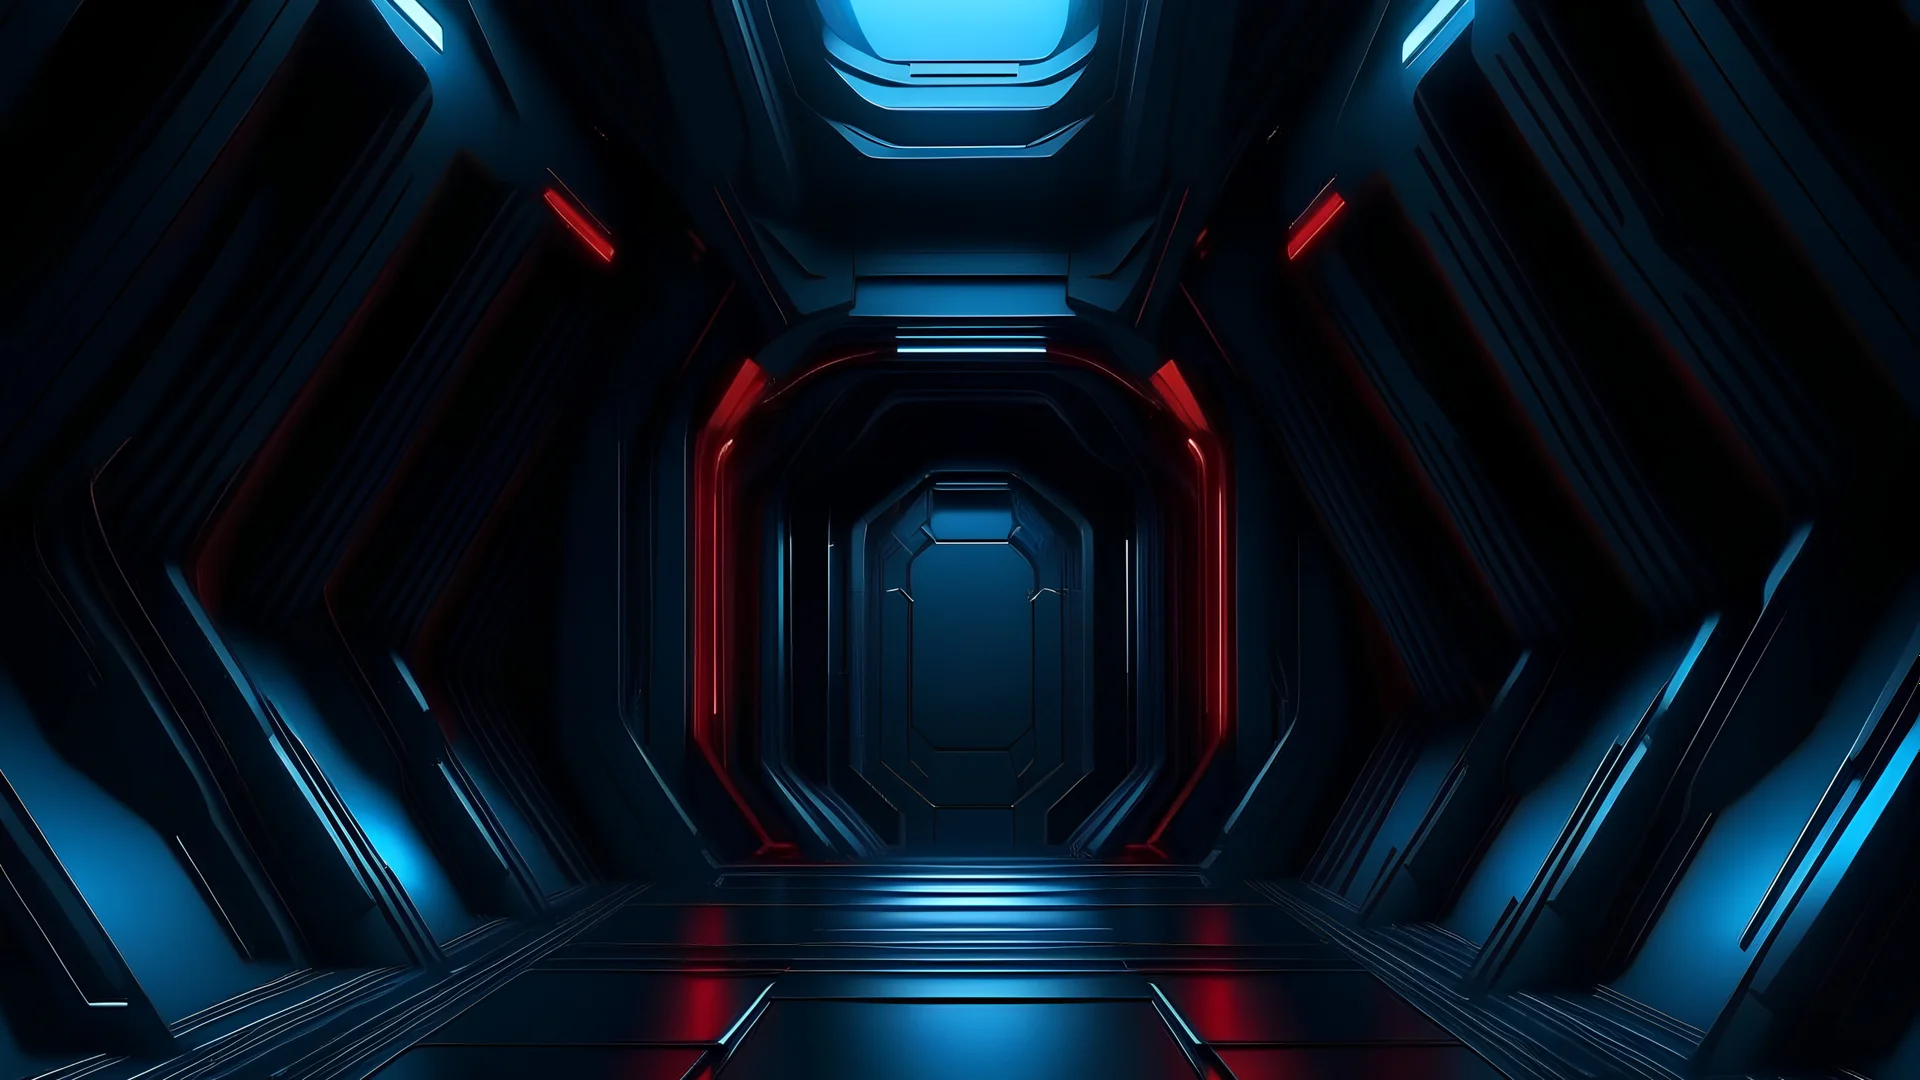 3d, grey,blue,dark mode, wallpaper,,background,design,paint,futuristic, space ship interior, technology, thin red streak, thick matte lines with soft edges, minimalistic